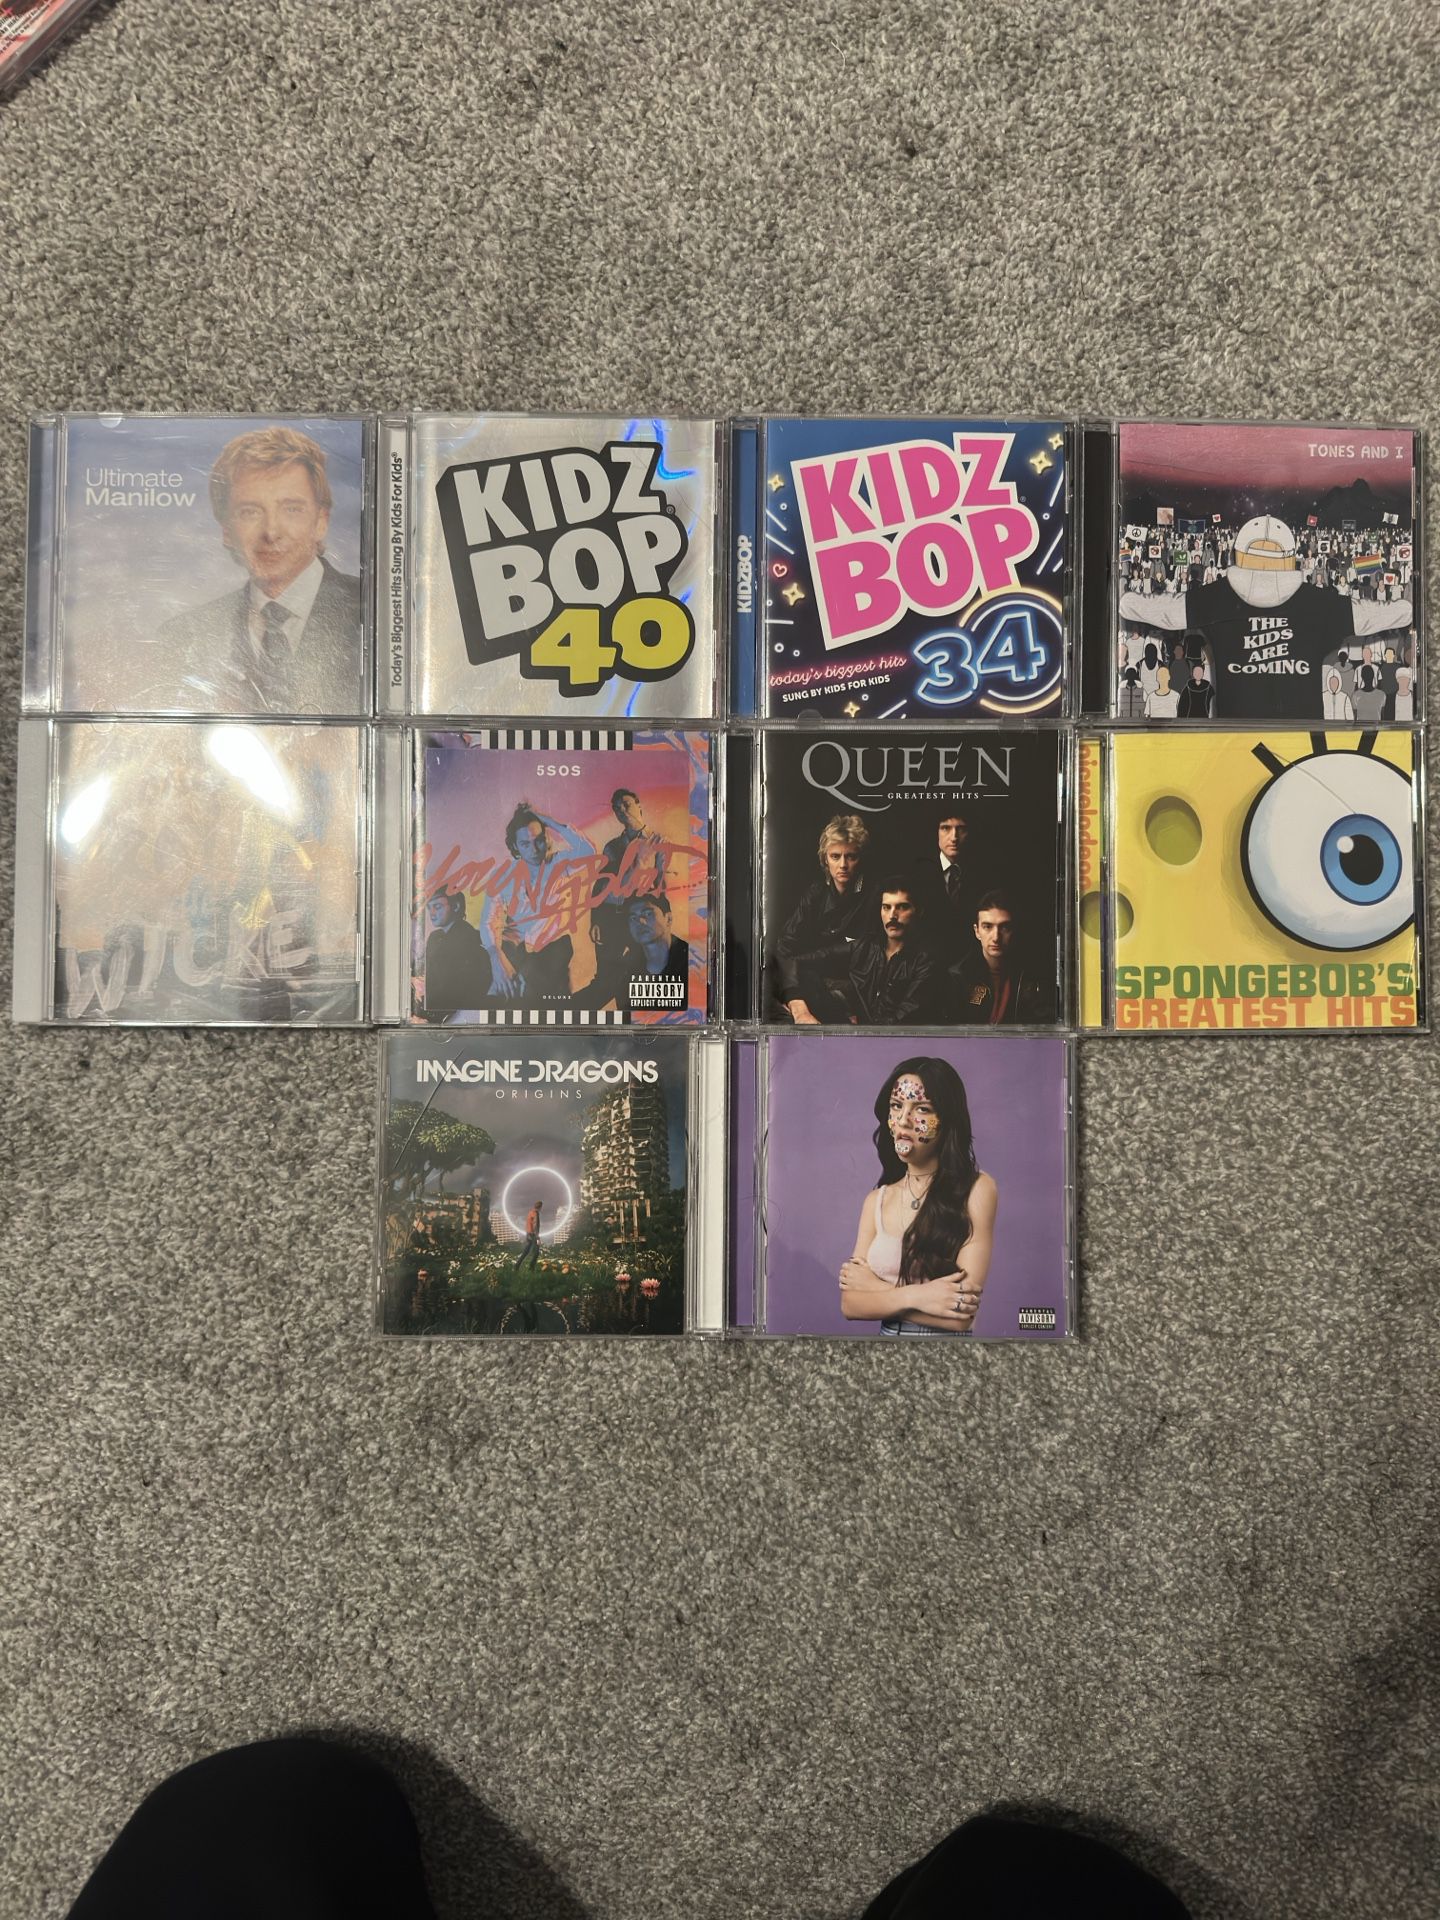 Bunch Of CDs Together Or Each